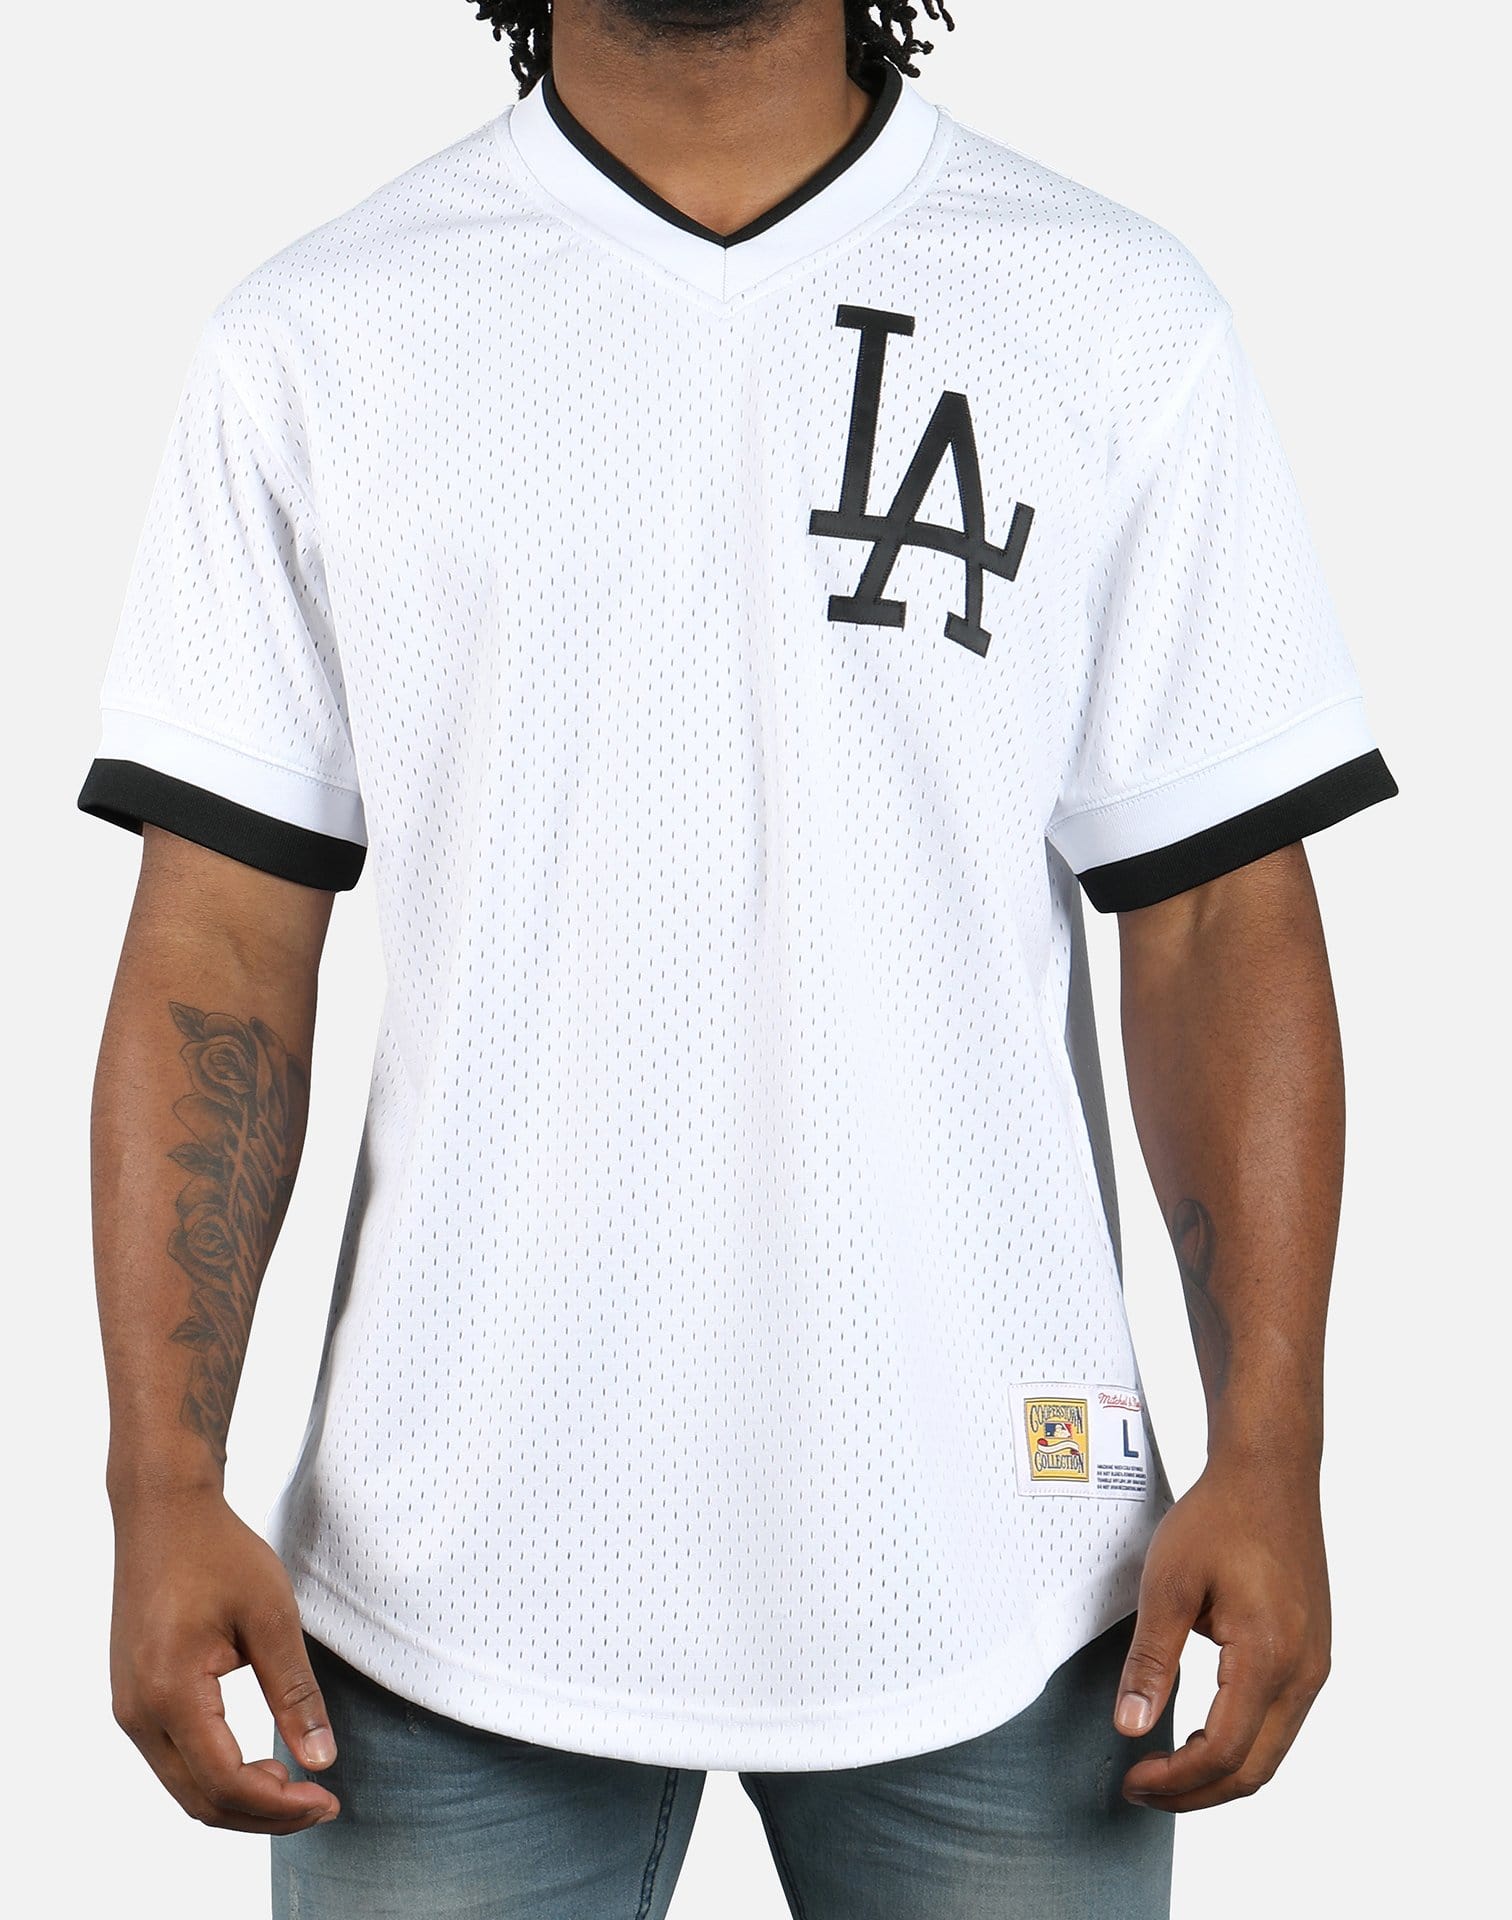 la dodgers mlb jersey and ness